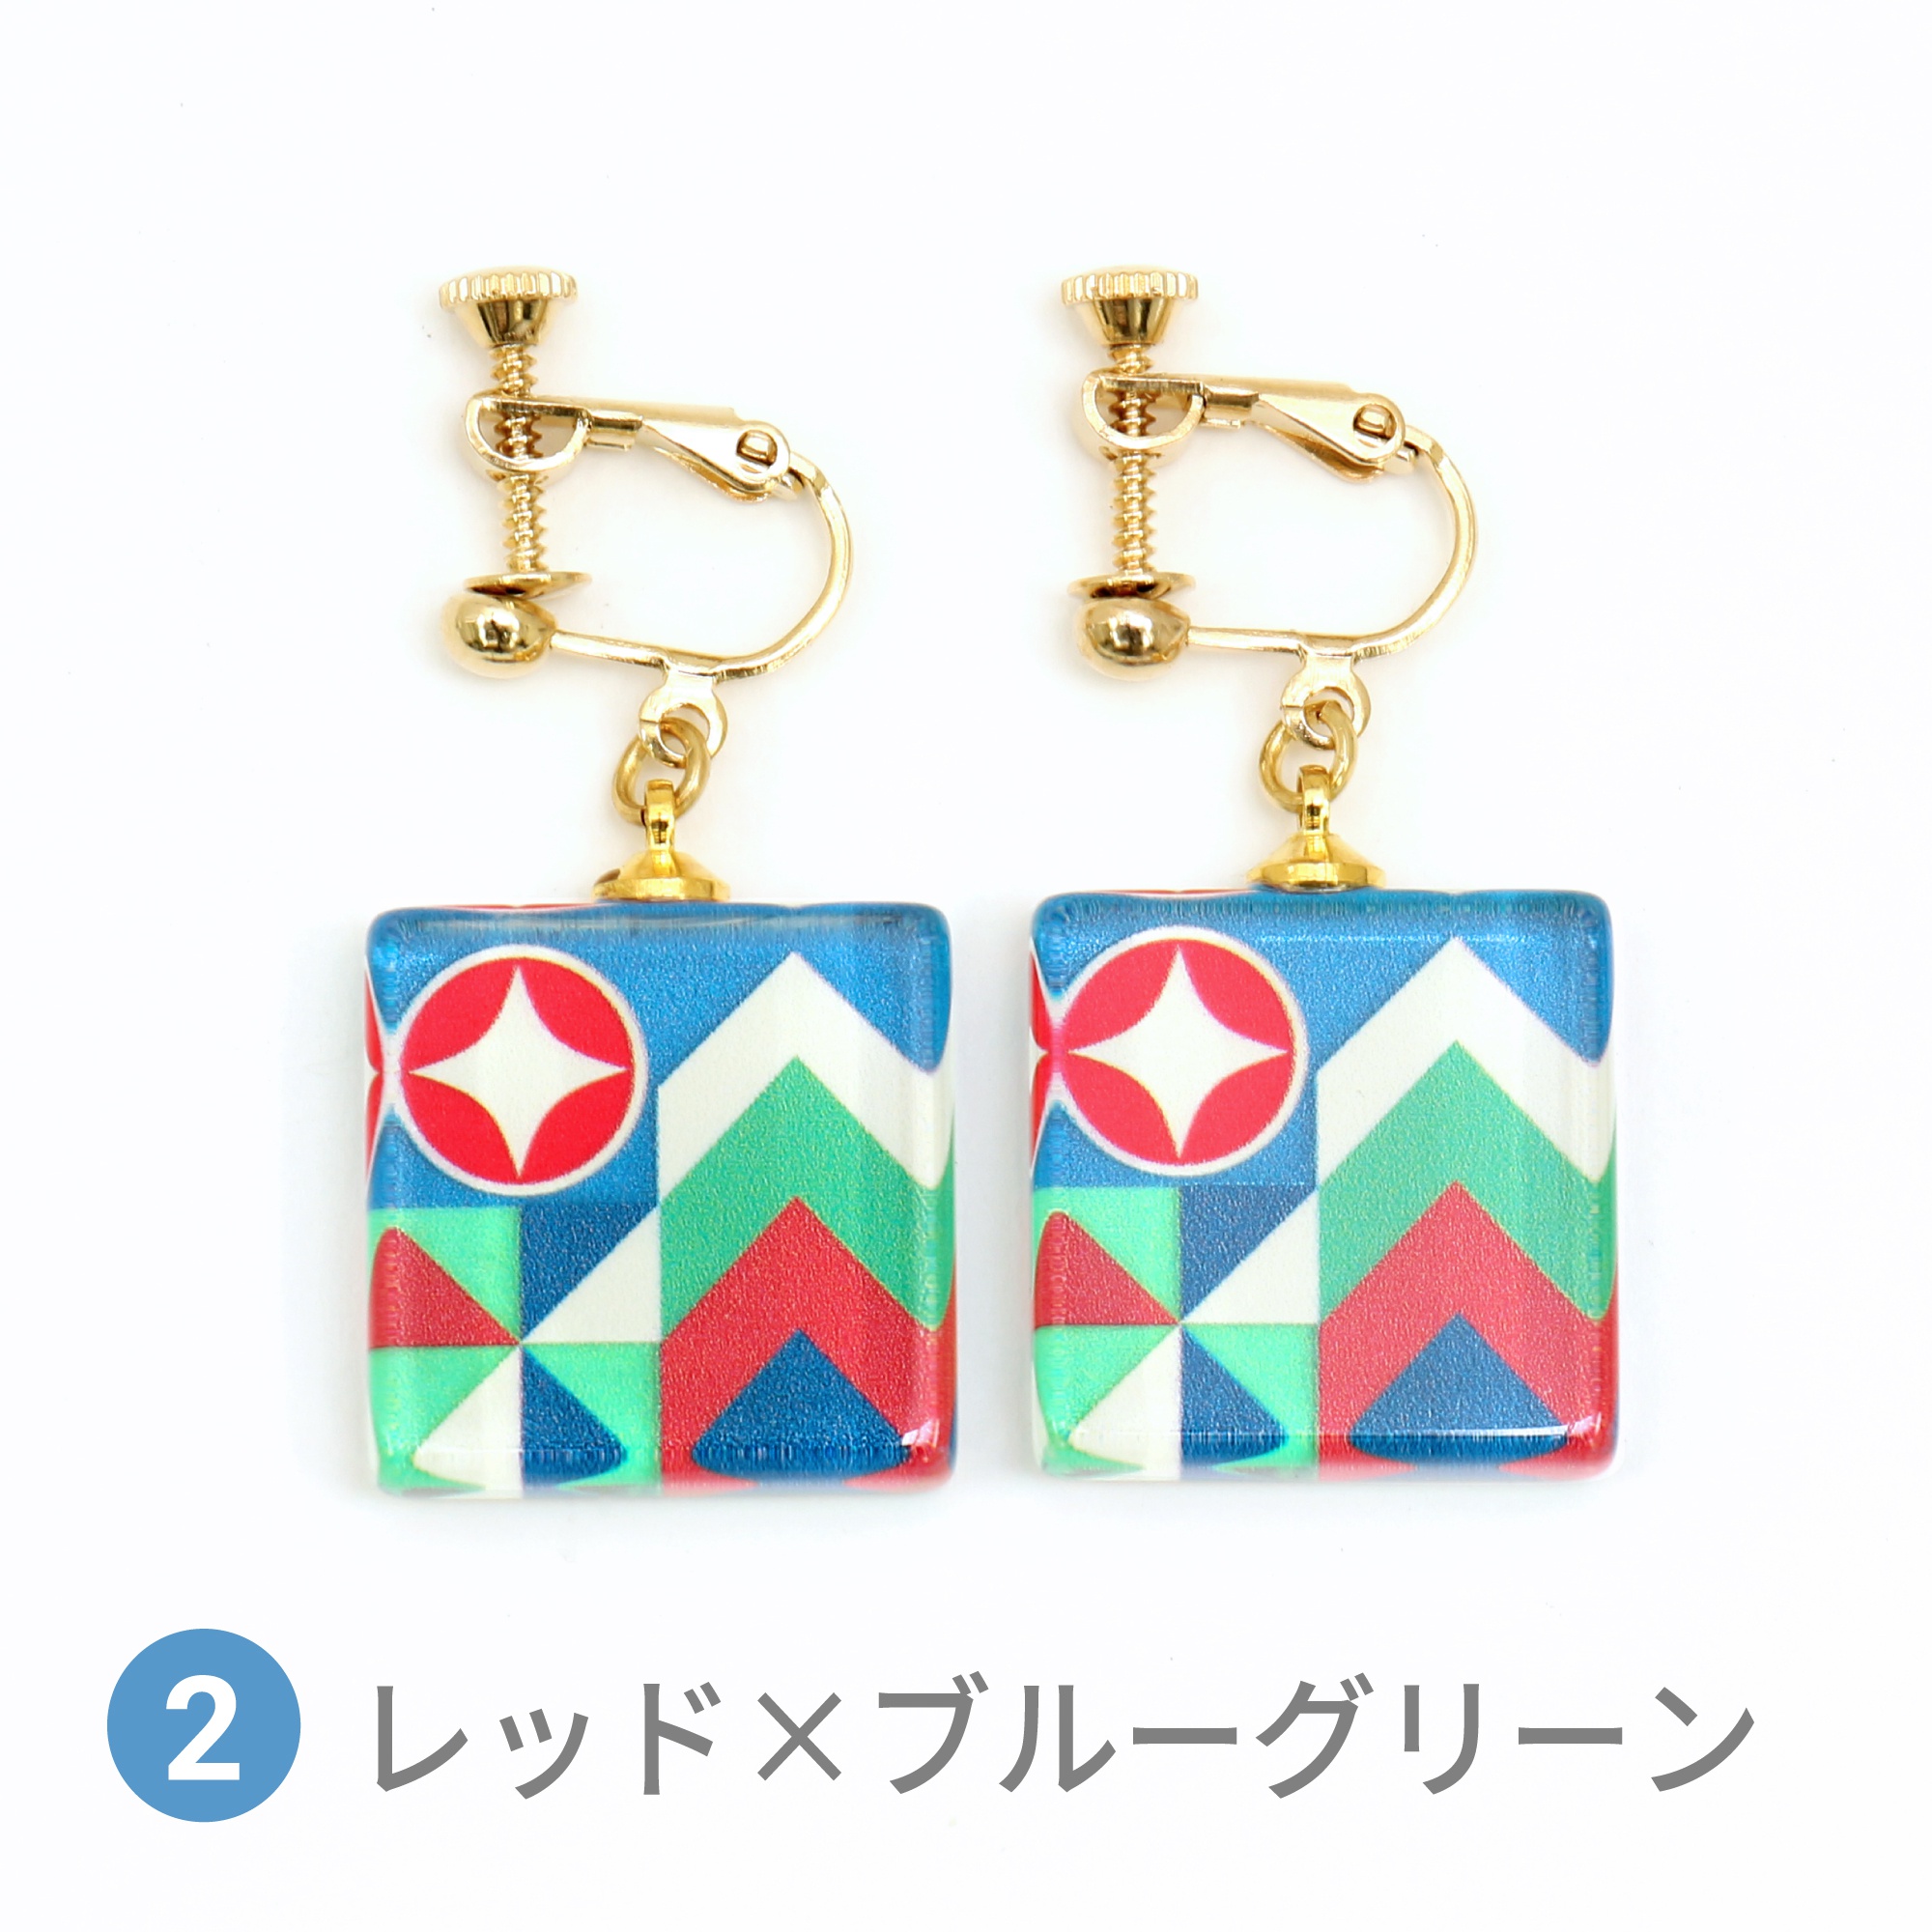 Glass accessories Earring GRID SYSTEM red&bluegreen square shape